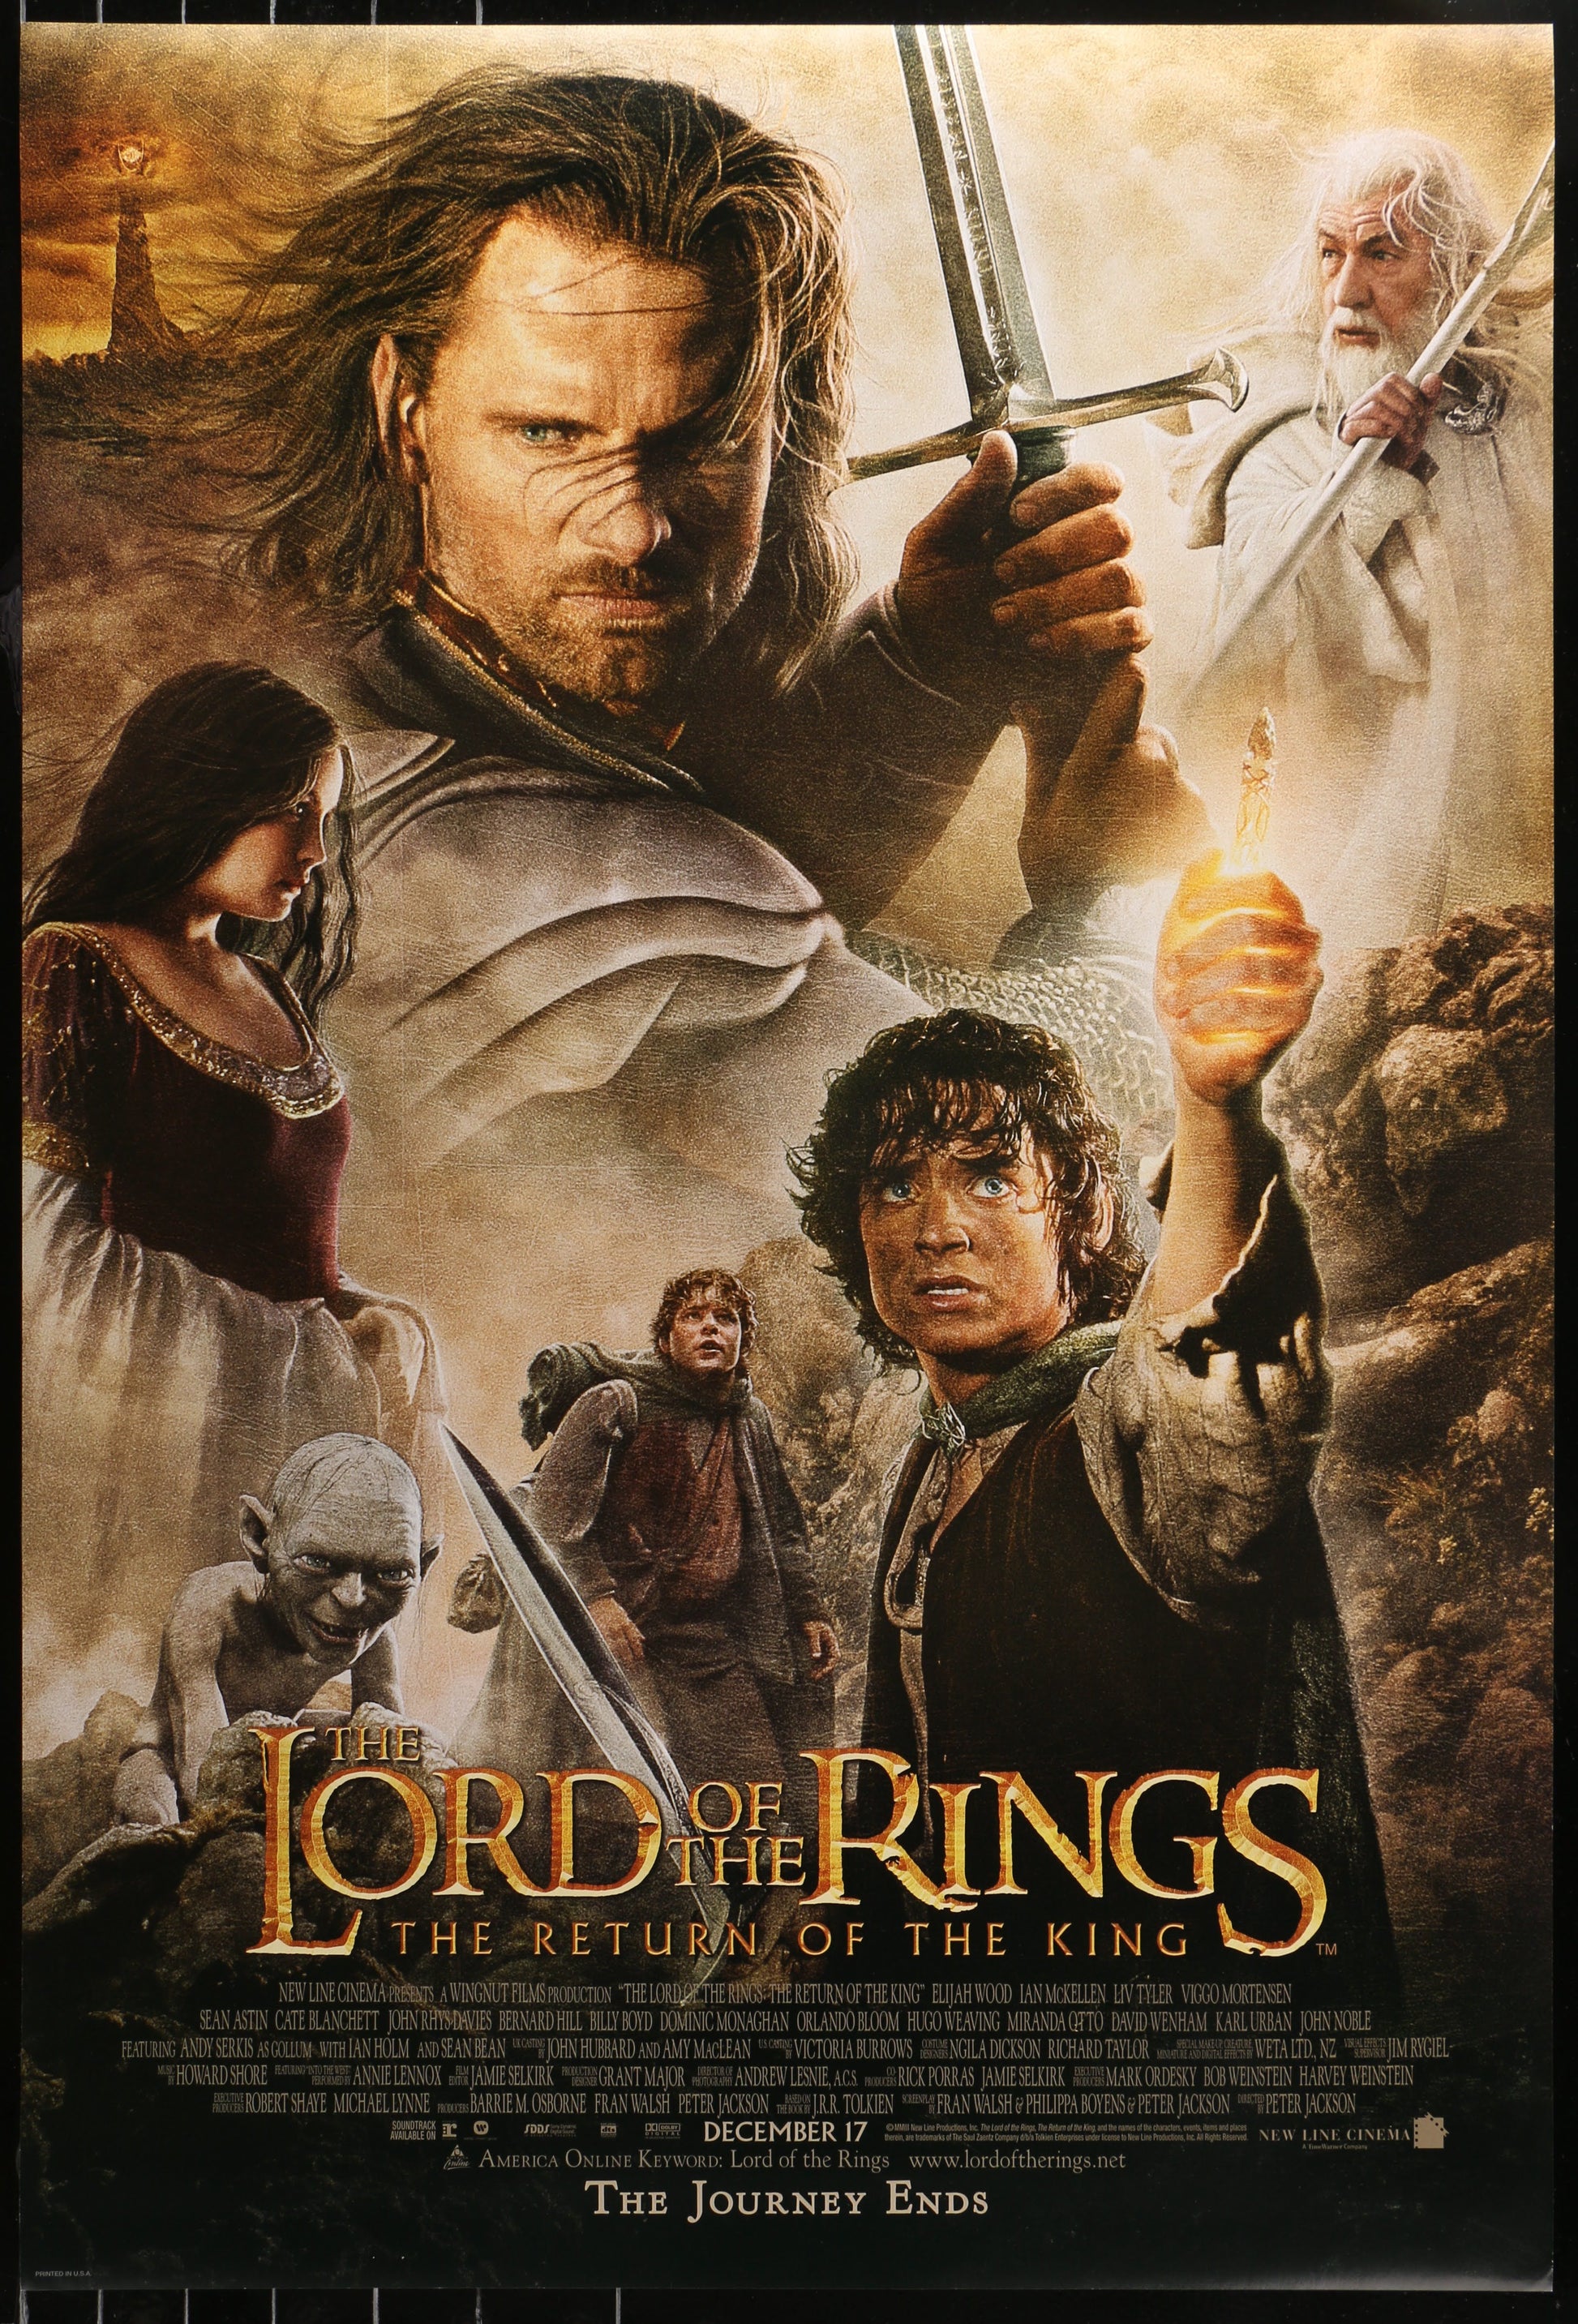 The Lord Of The Rings: The Return Of The King US One Sheet (2003) - ORIGINAL RELEASE - posterpalace.com